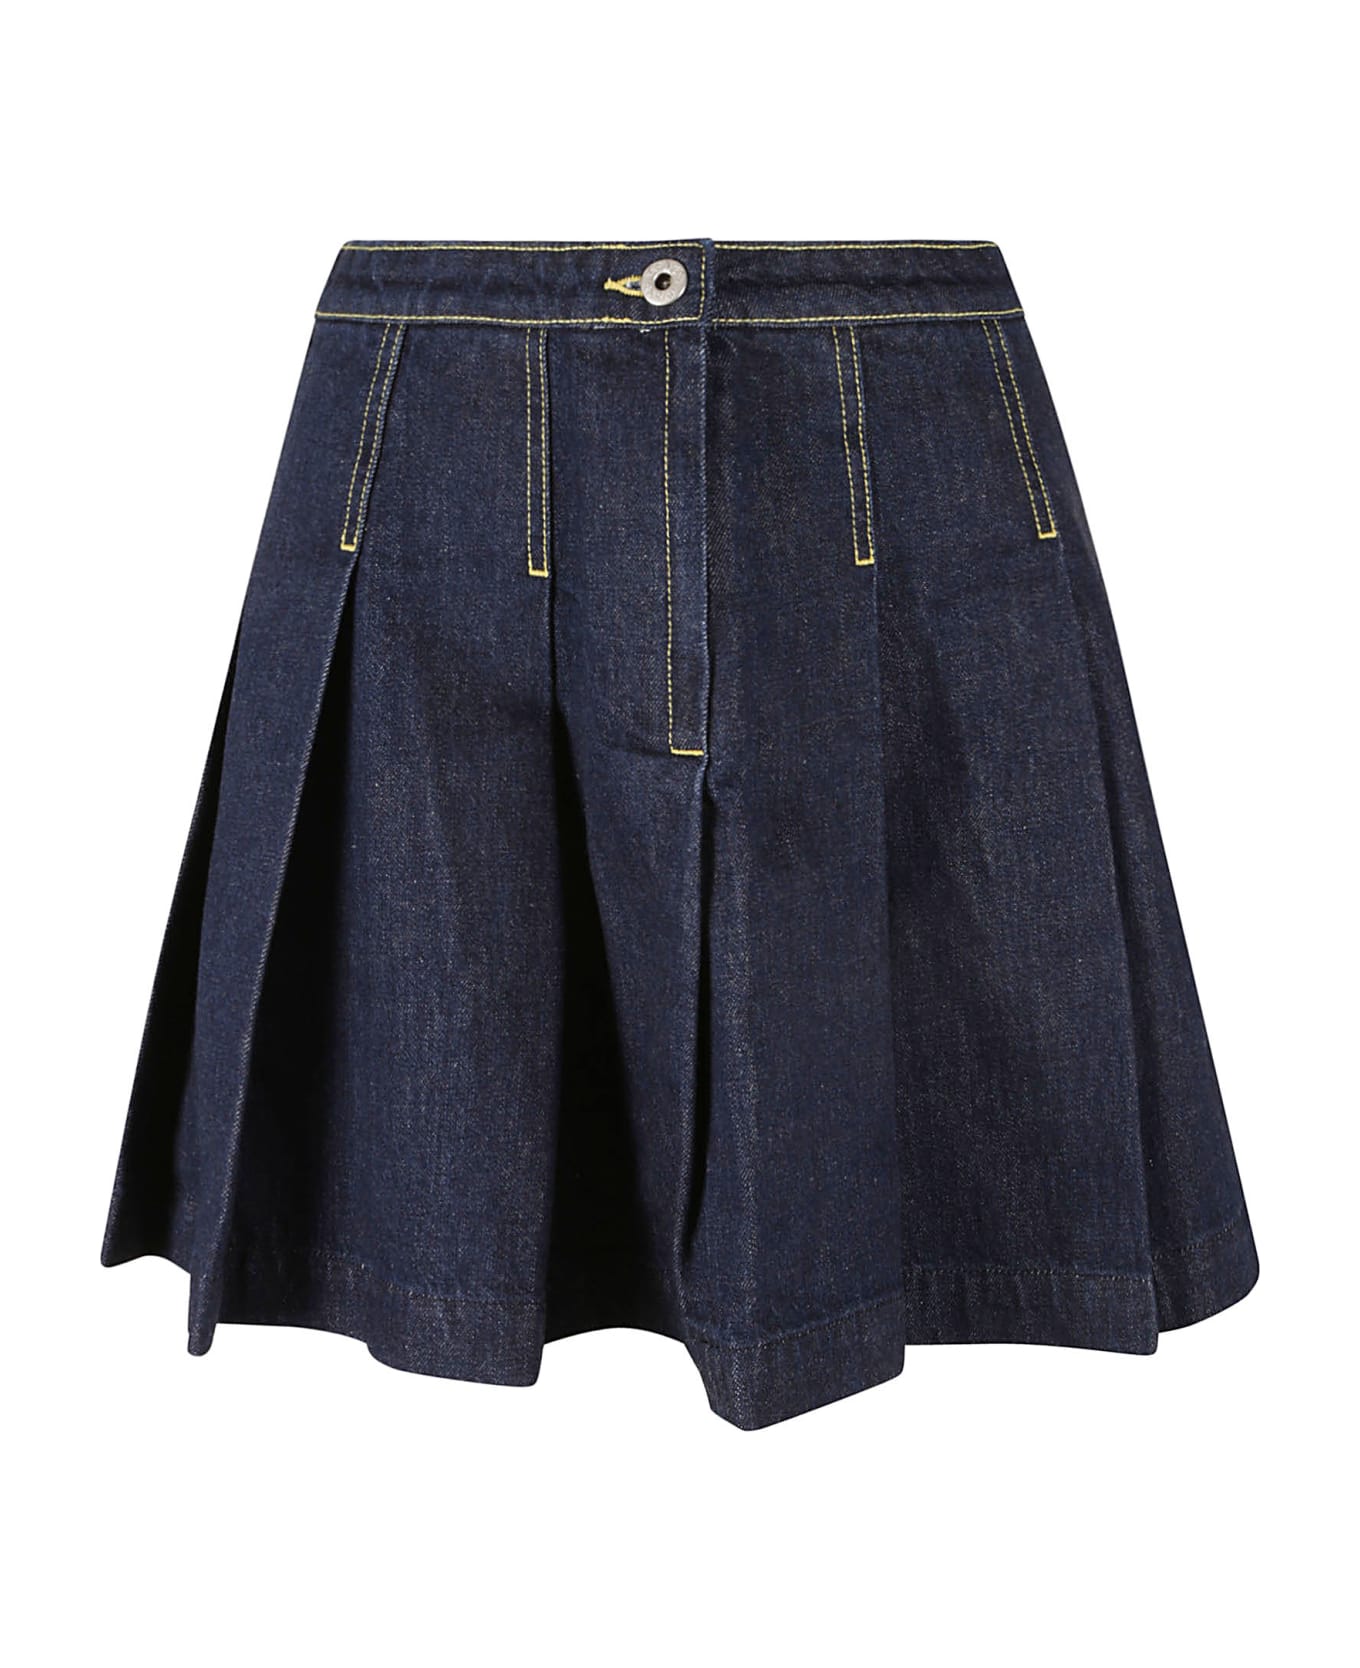 Kenzo Solid Fit & Flare Skirt - Rinse Blue スカート